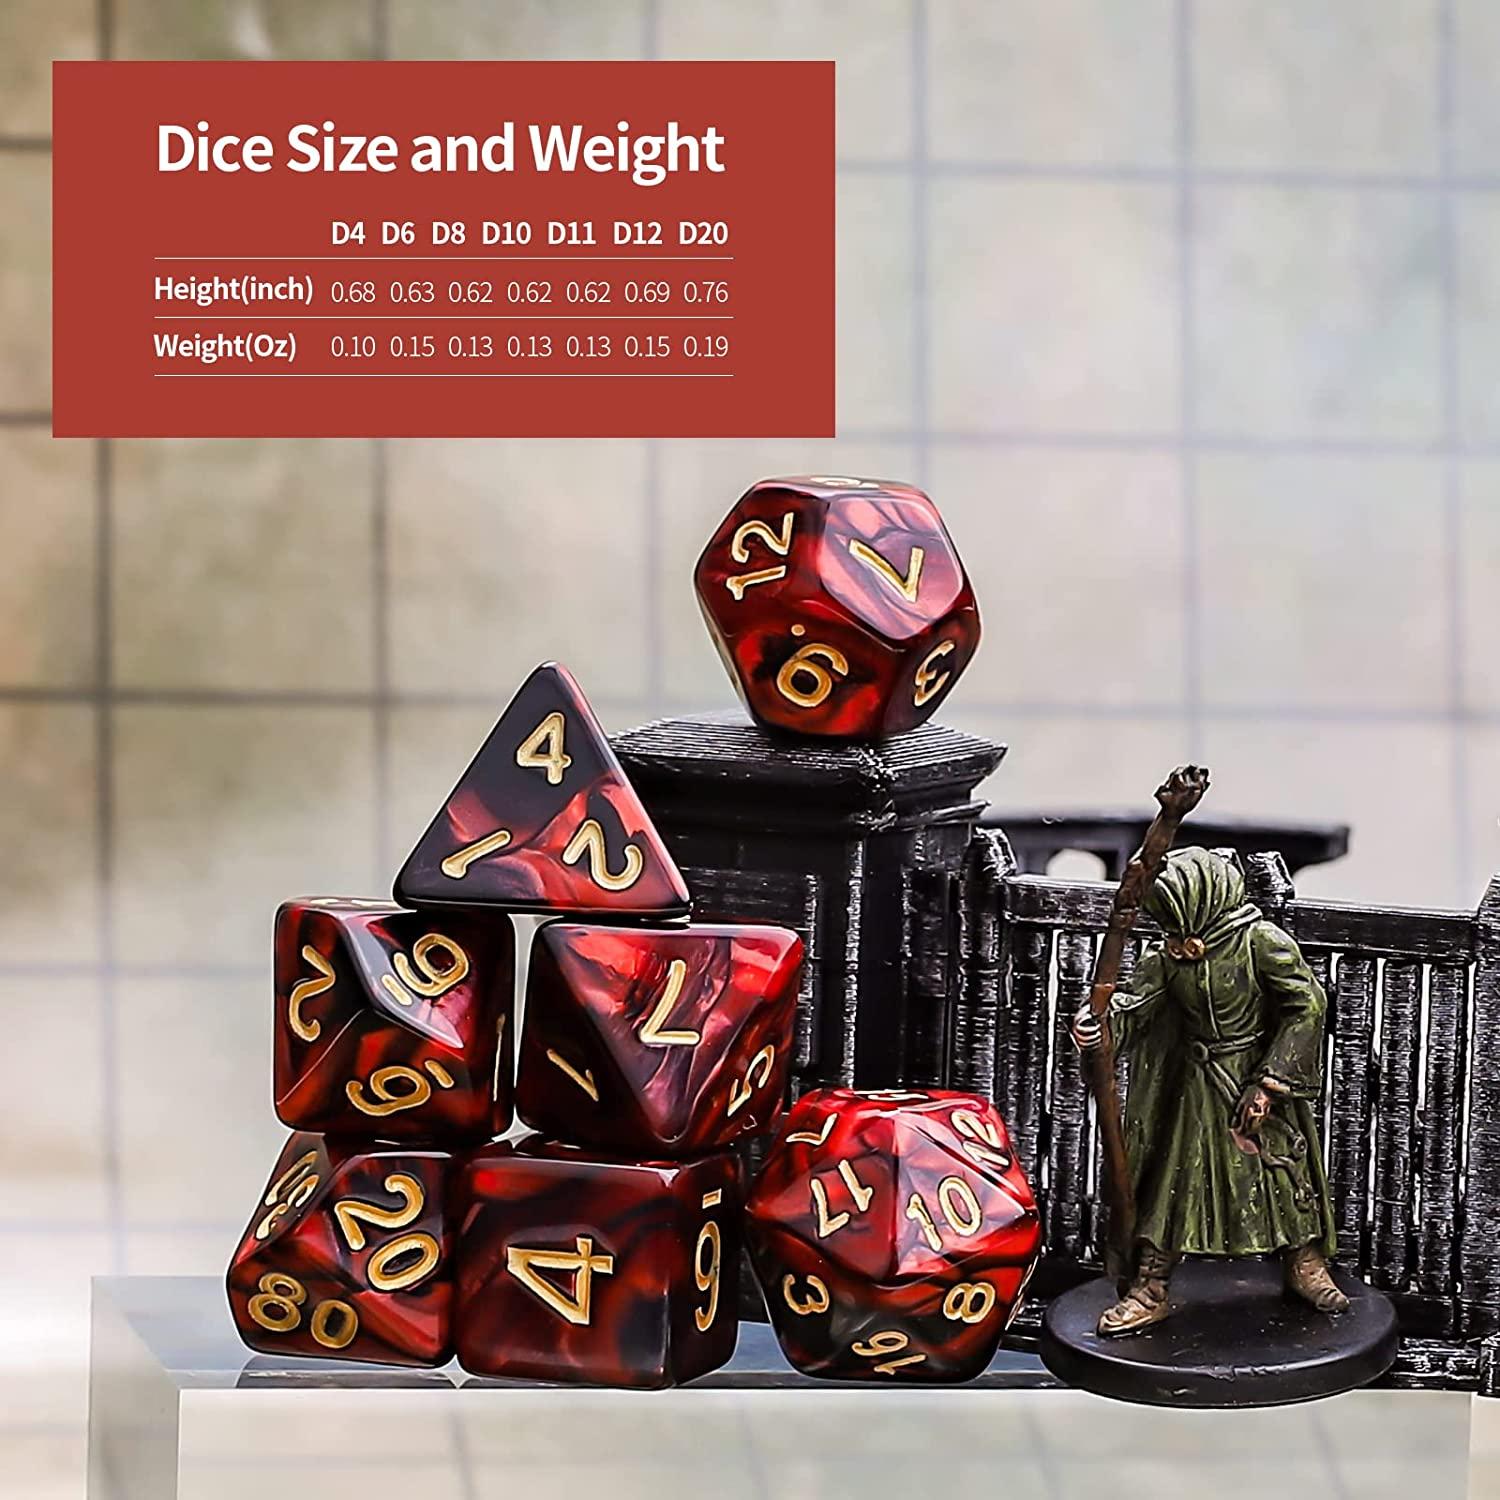 60 Pieces D4 Dice Polyhedral Set DND Board Game Tabletop RPG Red